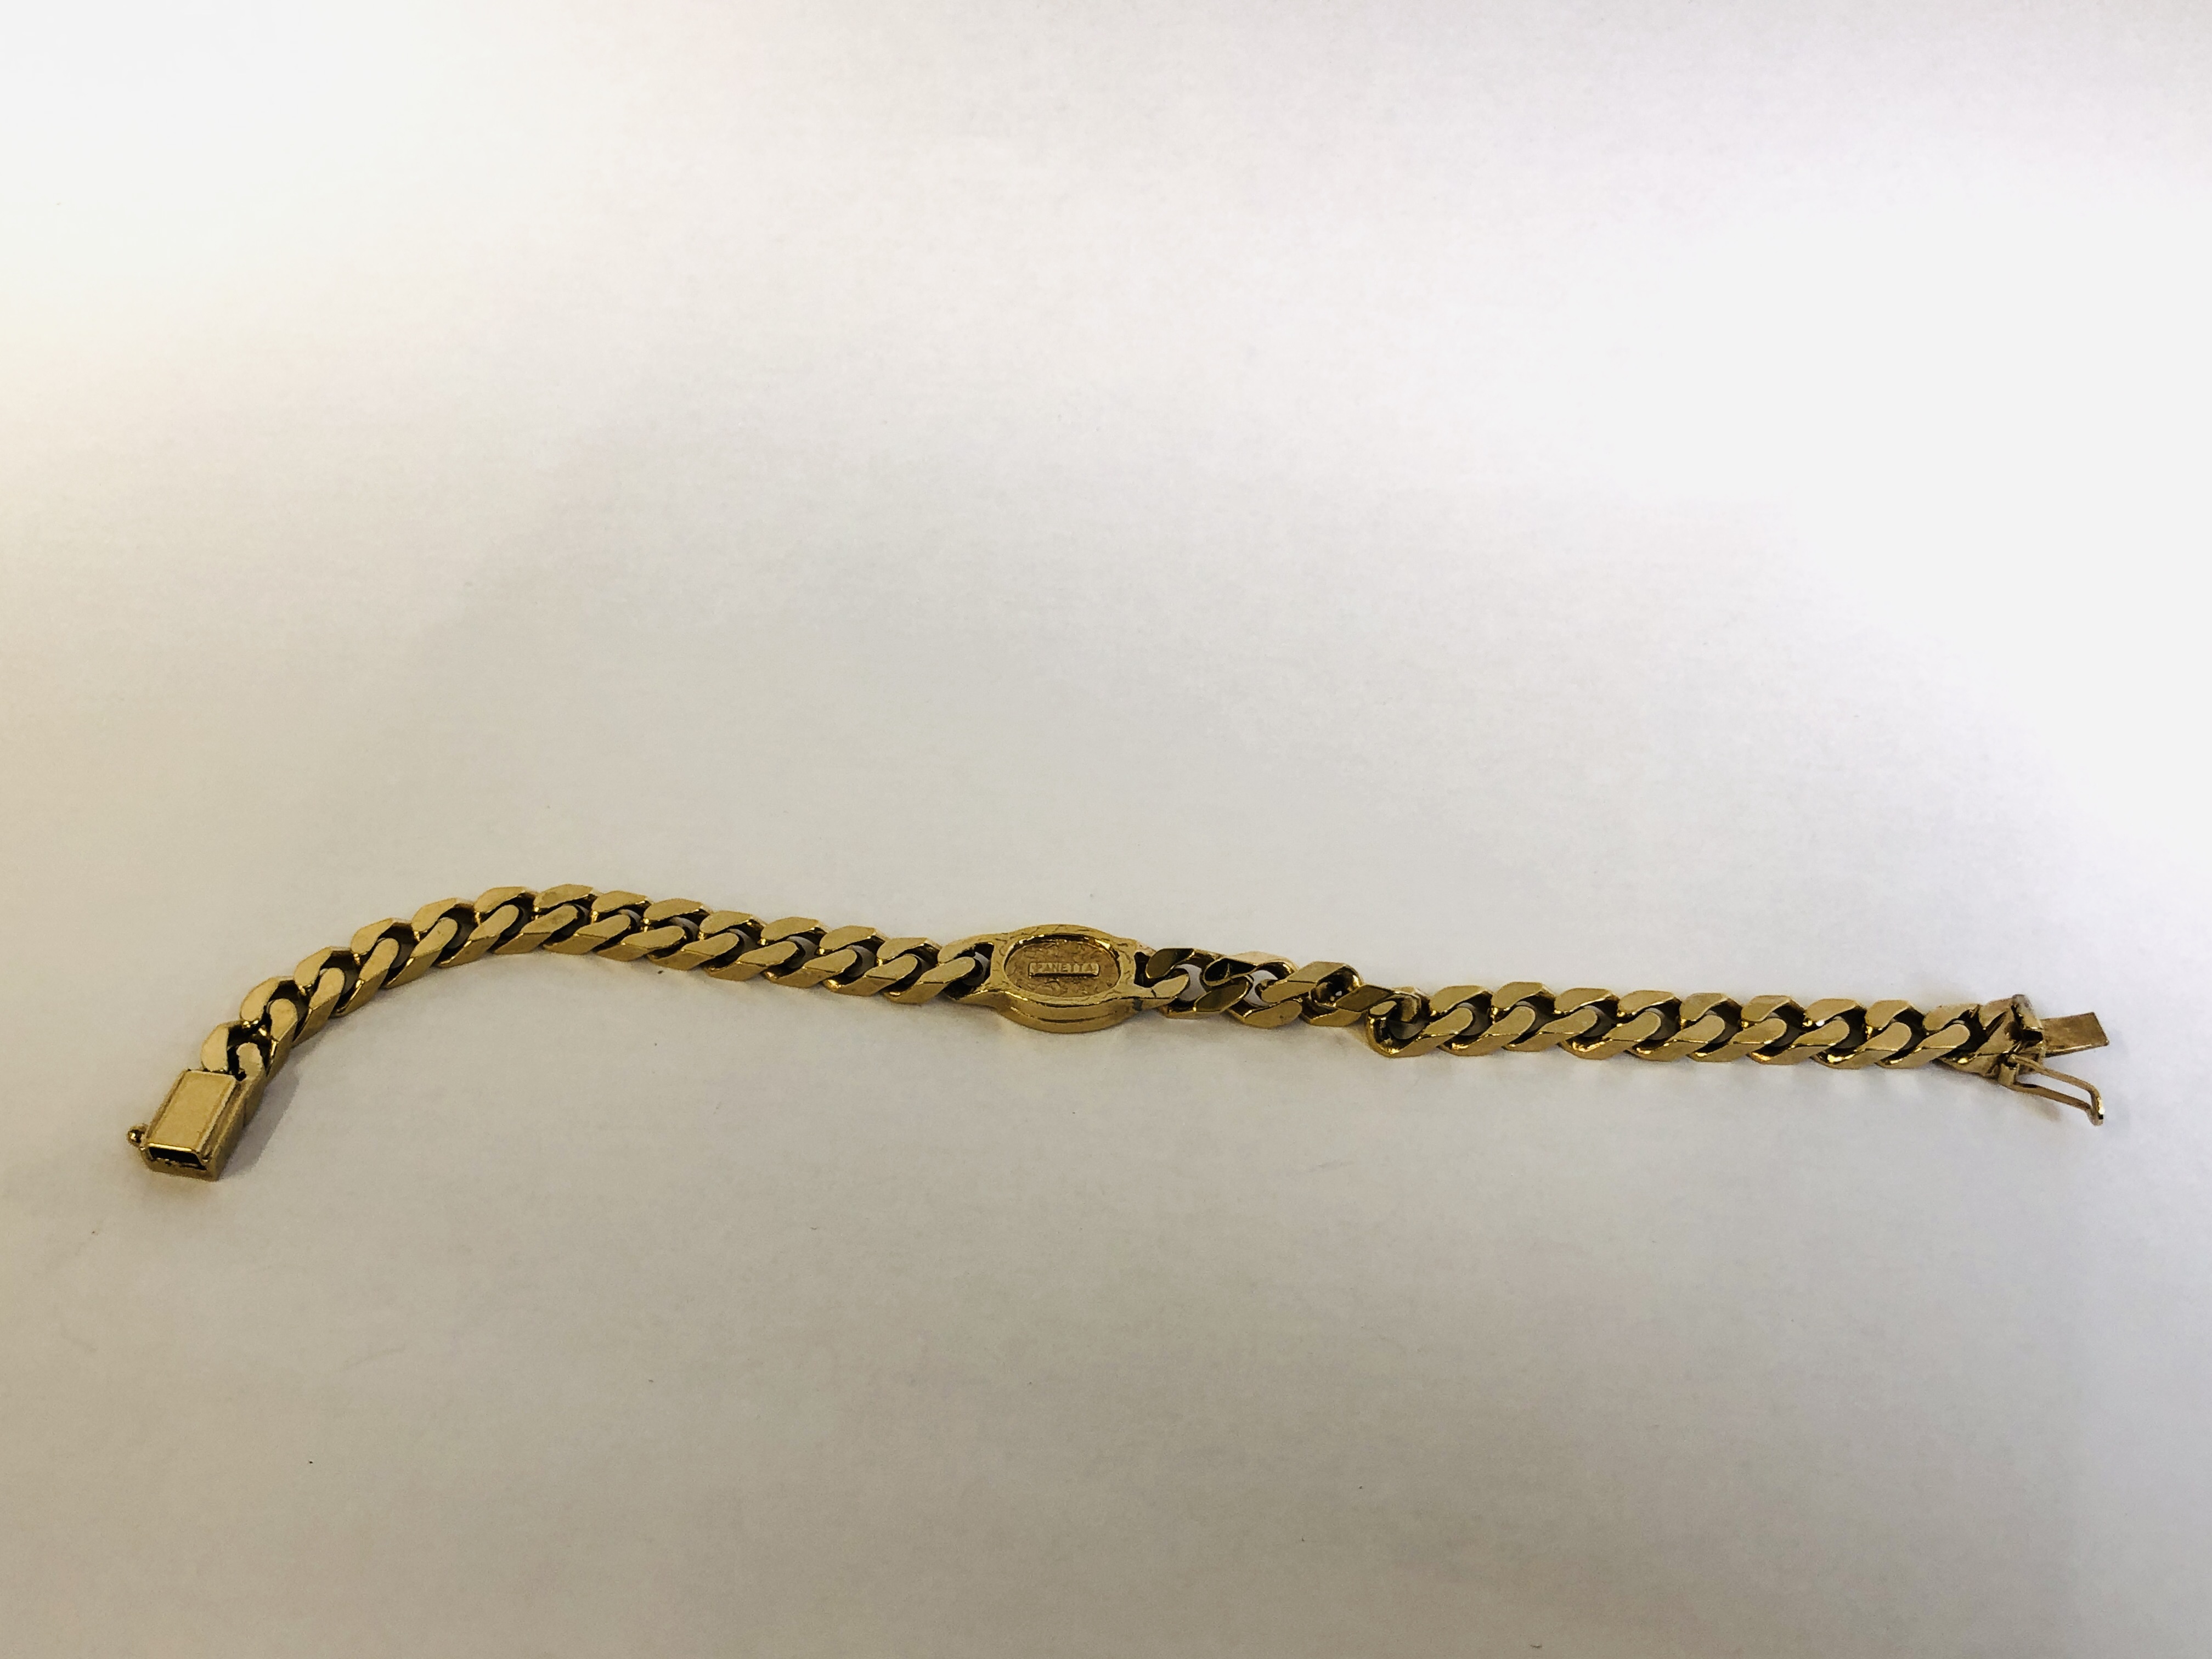 A GOLD TONE COSTUME BRACELET MARKED "PANETTA" ALONG WITH AN UNMARKED ROPE TWIST NECKLACE. - Image 9 of 13